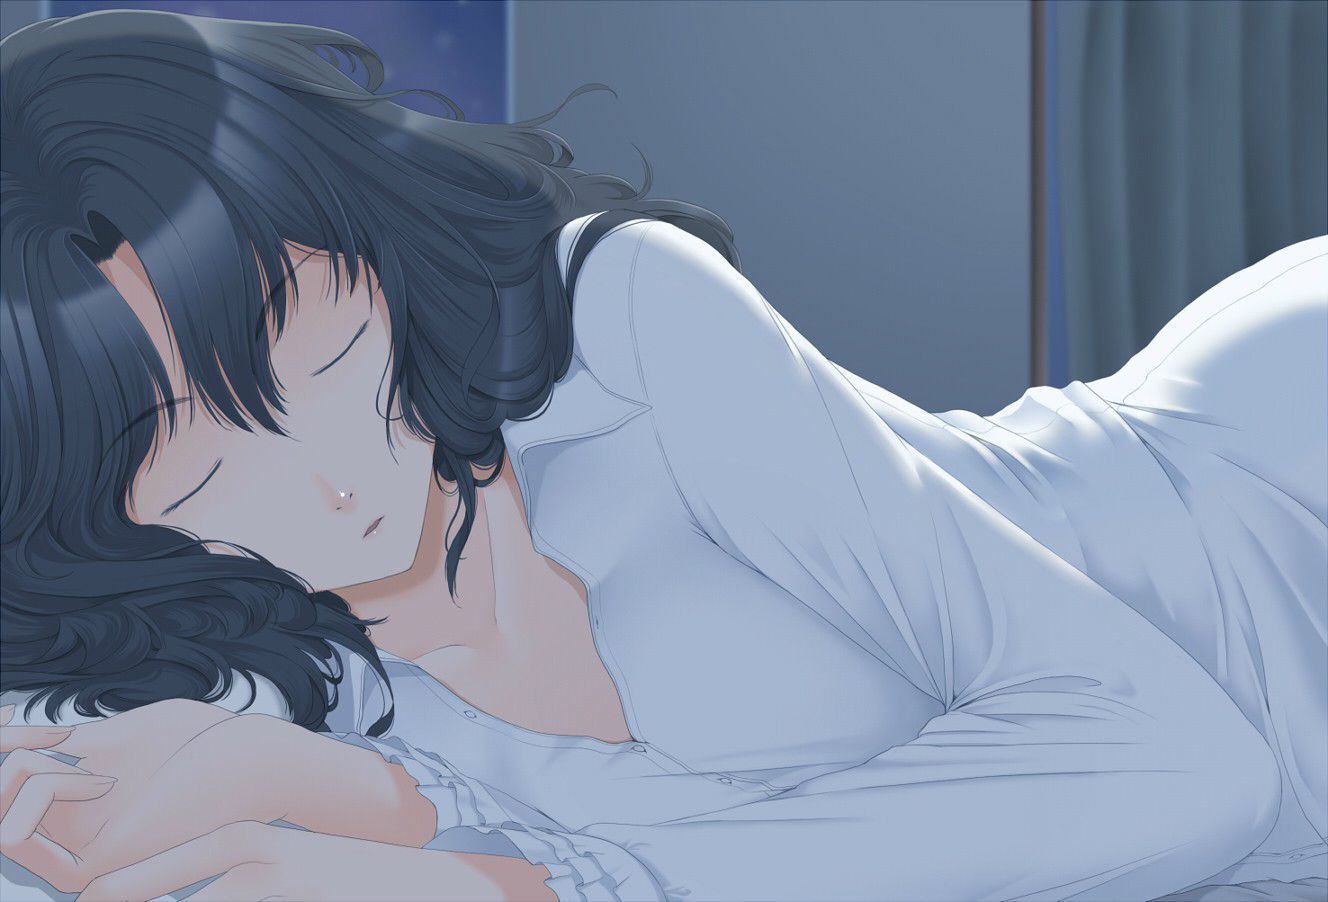 Cute characters "amagami" transcendence erotic illustrations images of the wwwwwww 24